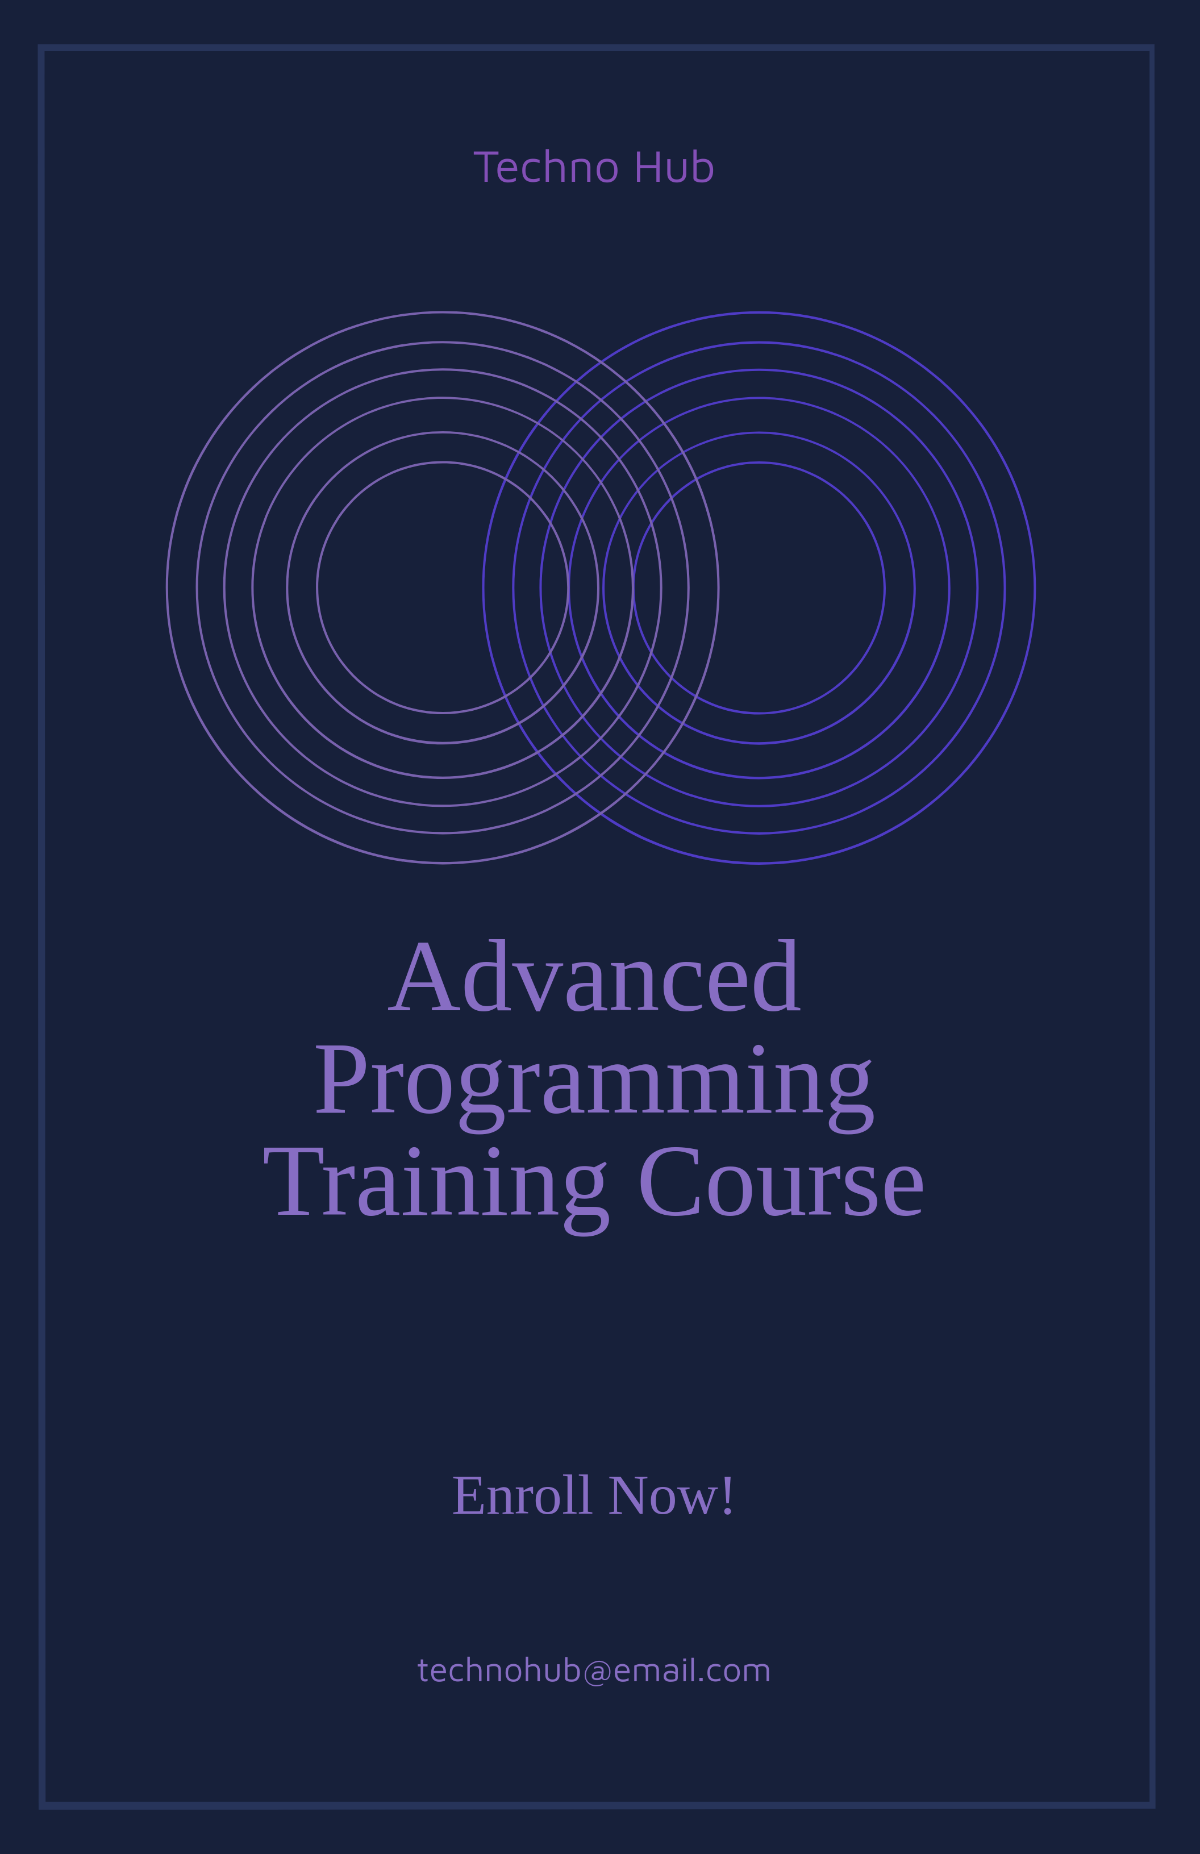 Free Training Course Poster Template